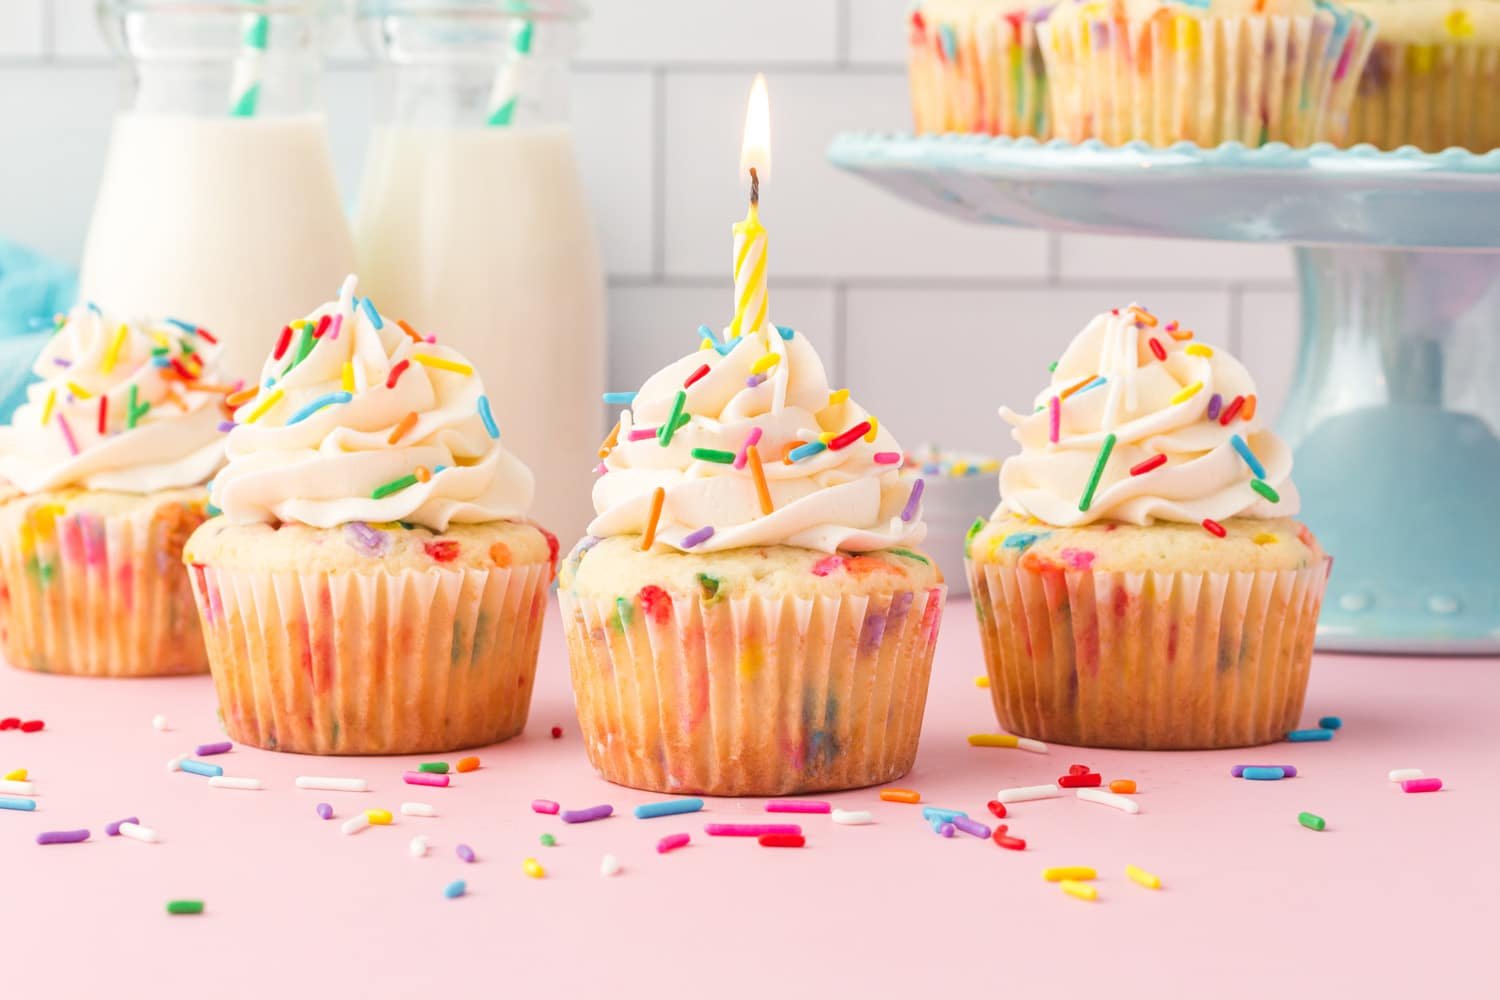 Funfetti cupcakes with one center birthday candle on pink background